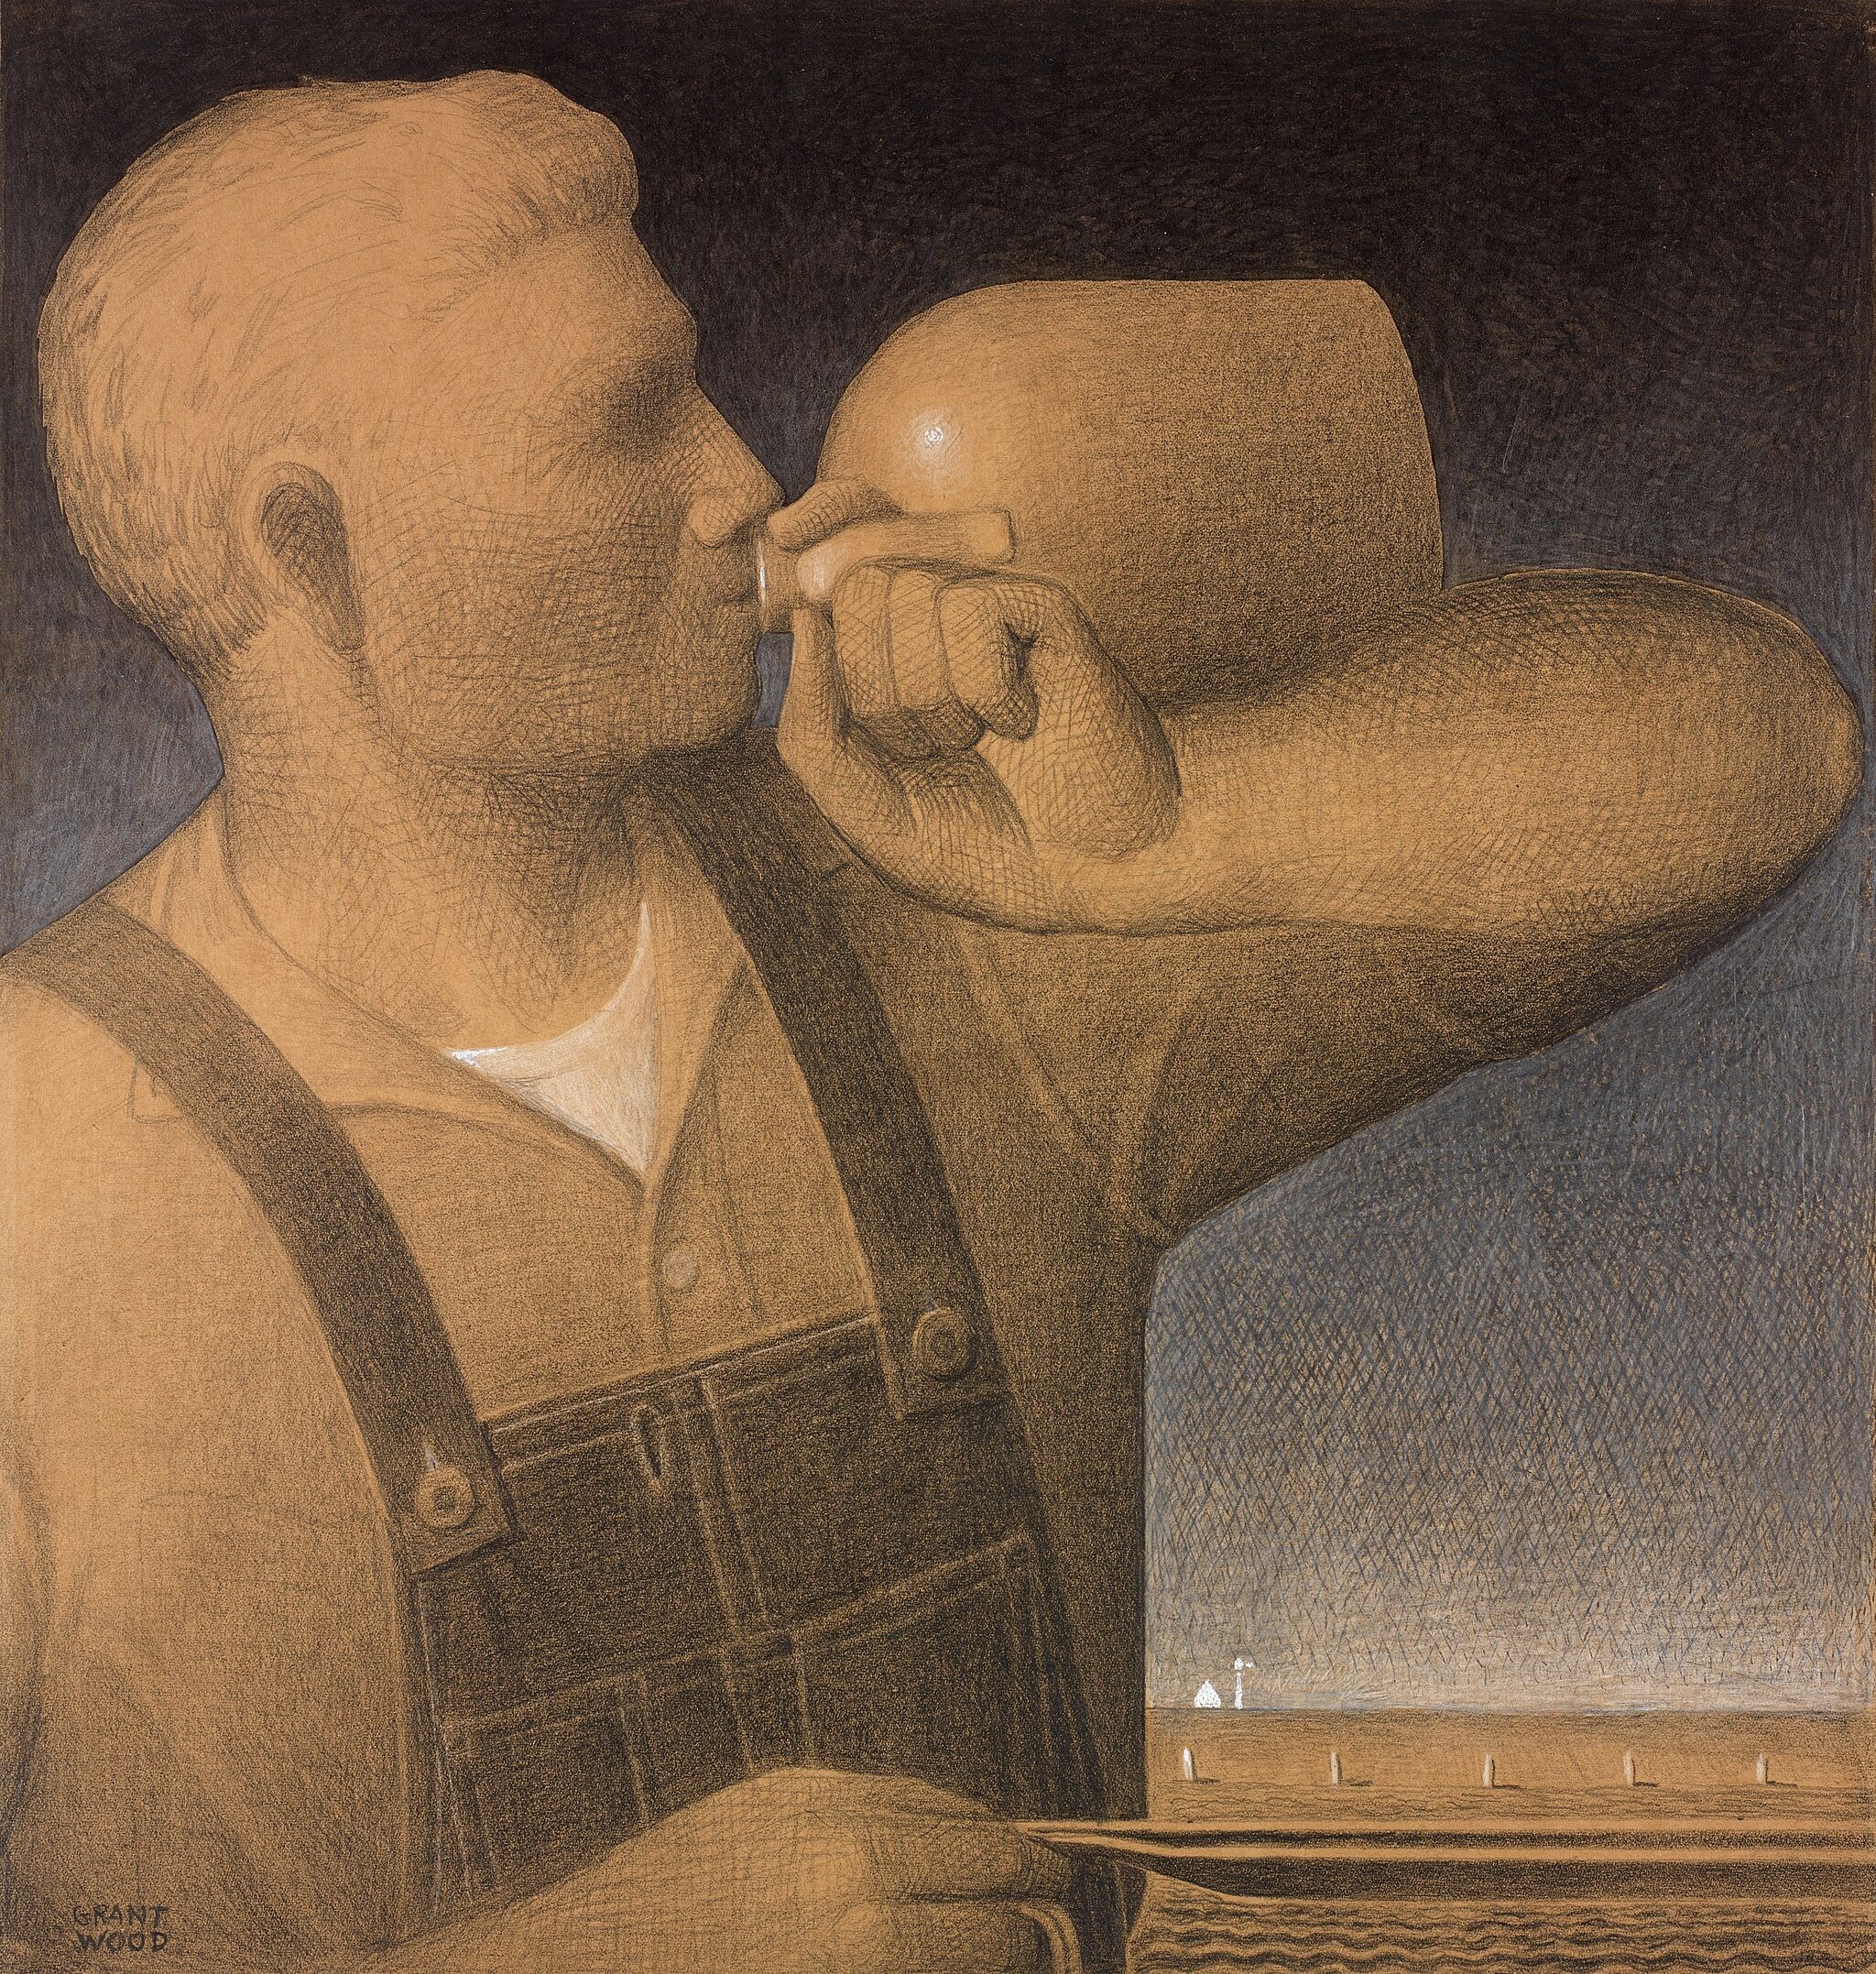 Painting of man drinking out of pewter jug holding reigns. 